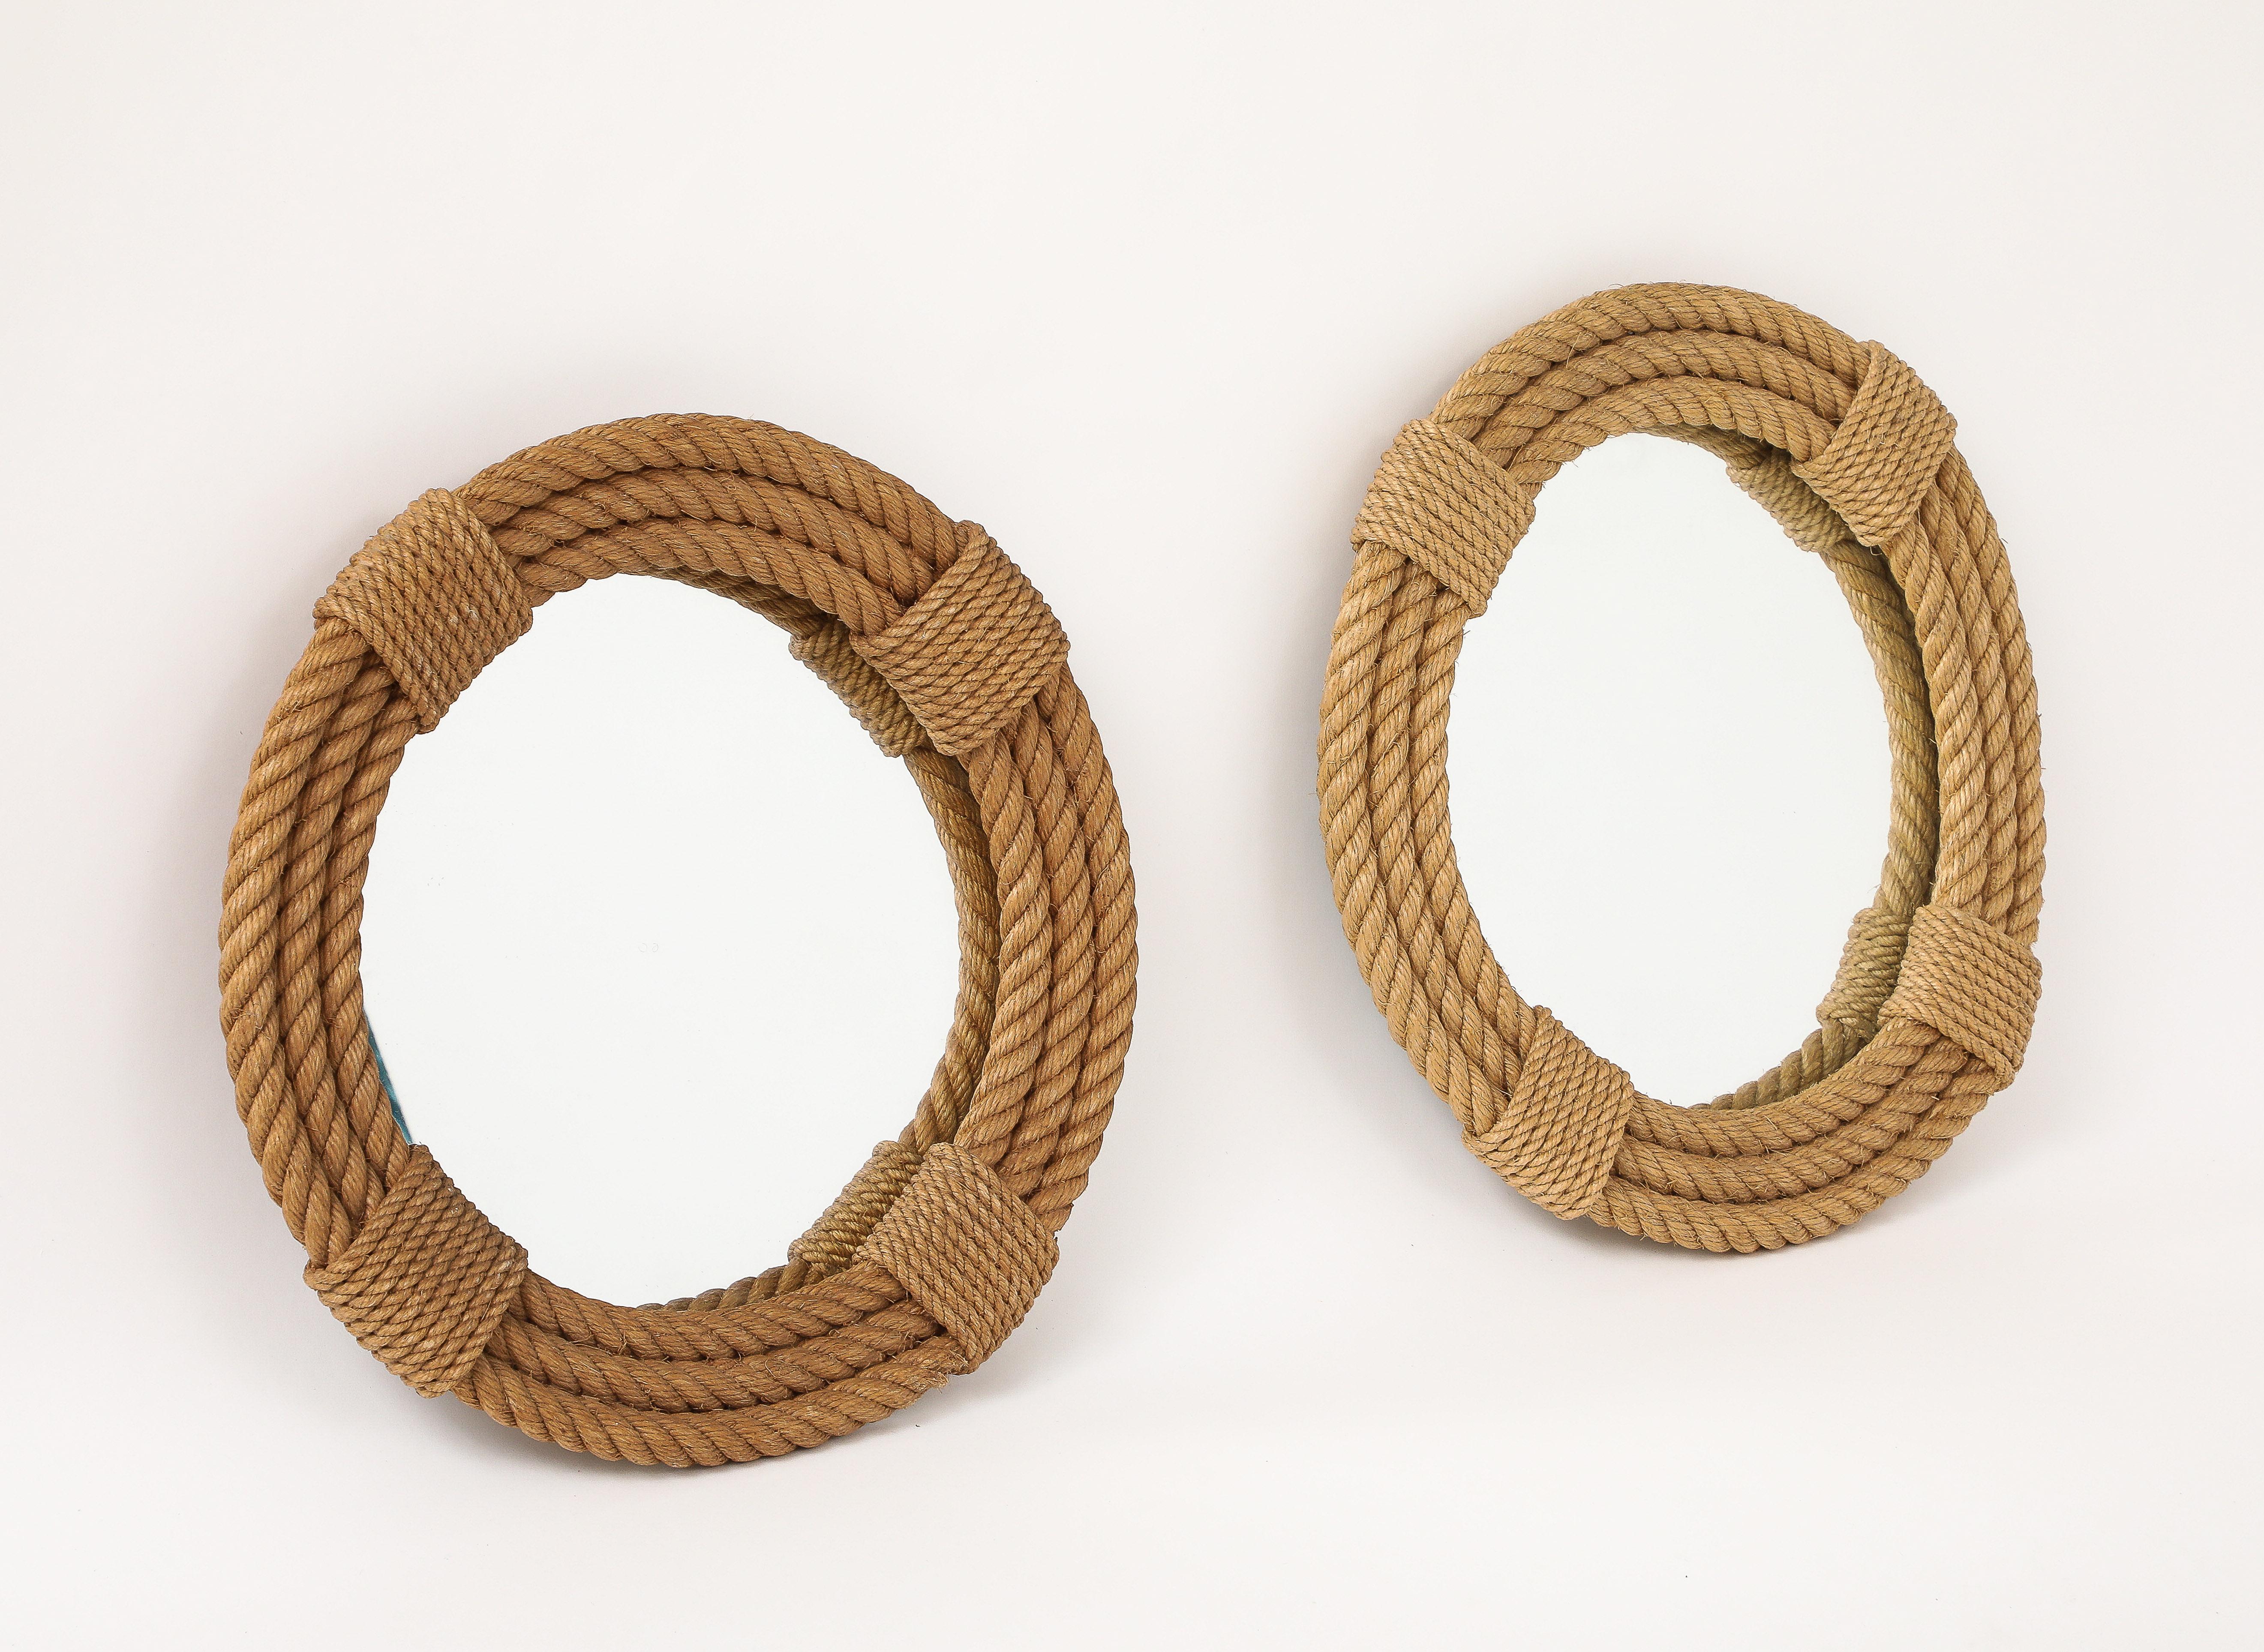 French Riviera icon designers duo Adrien Audoux & Frida Minnet faux pair of rope wall mirrors.
Slight different in rope tone.
1 inch diameter difference.